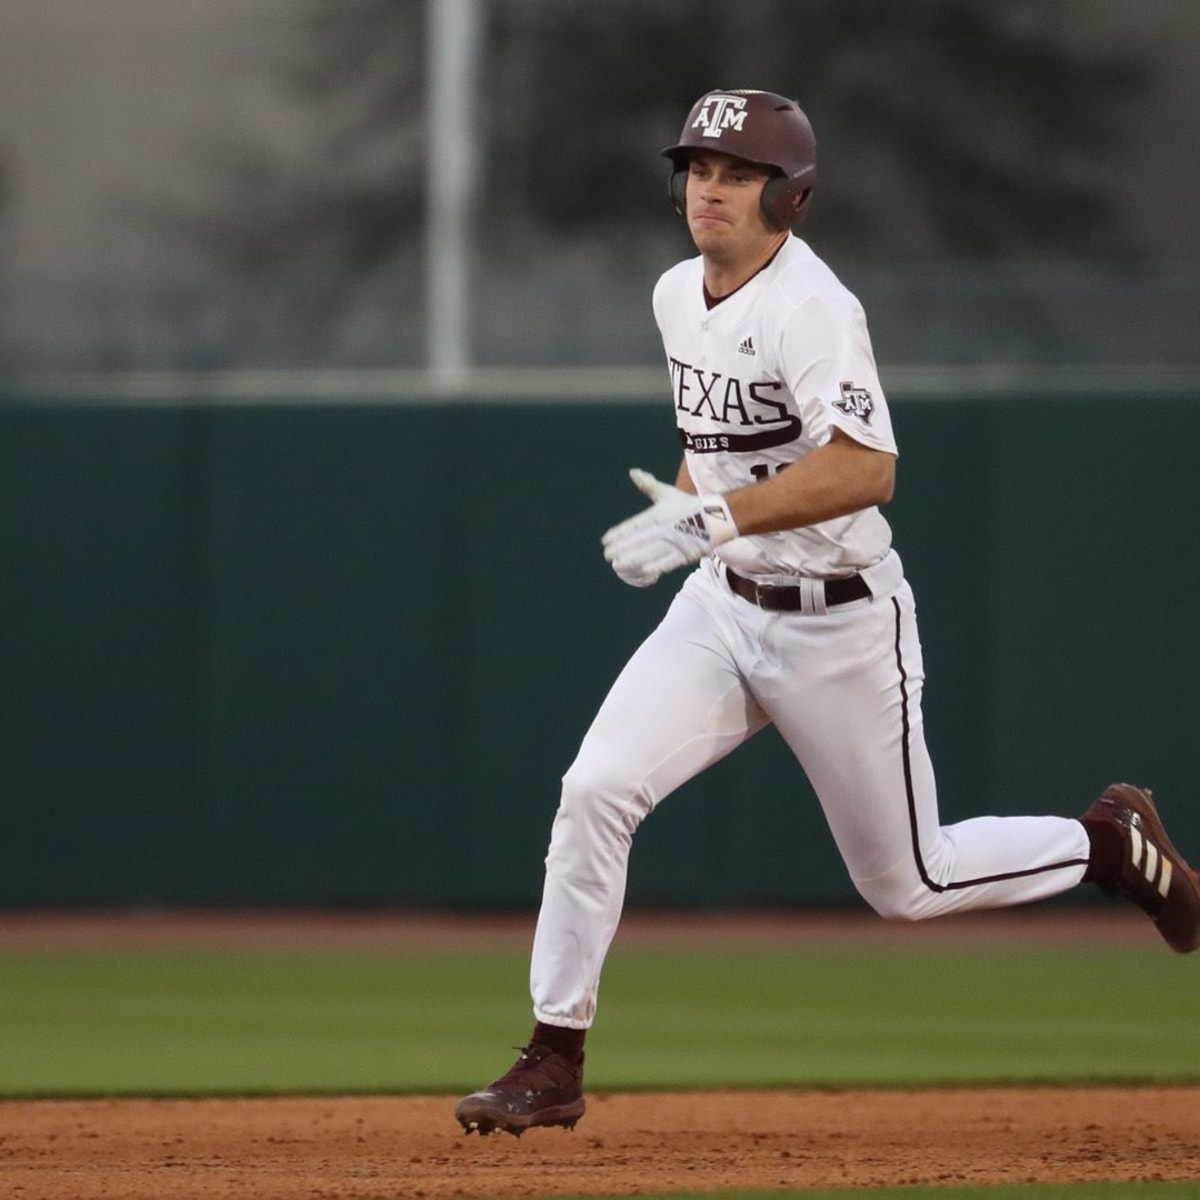 Texas A&M baseball heads to West Virginia regional after late slump